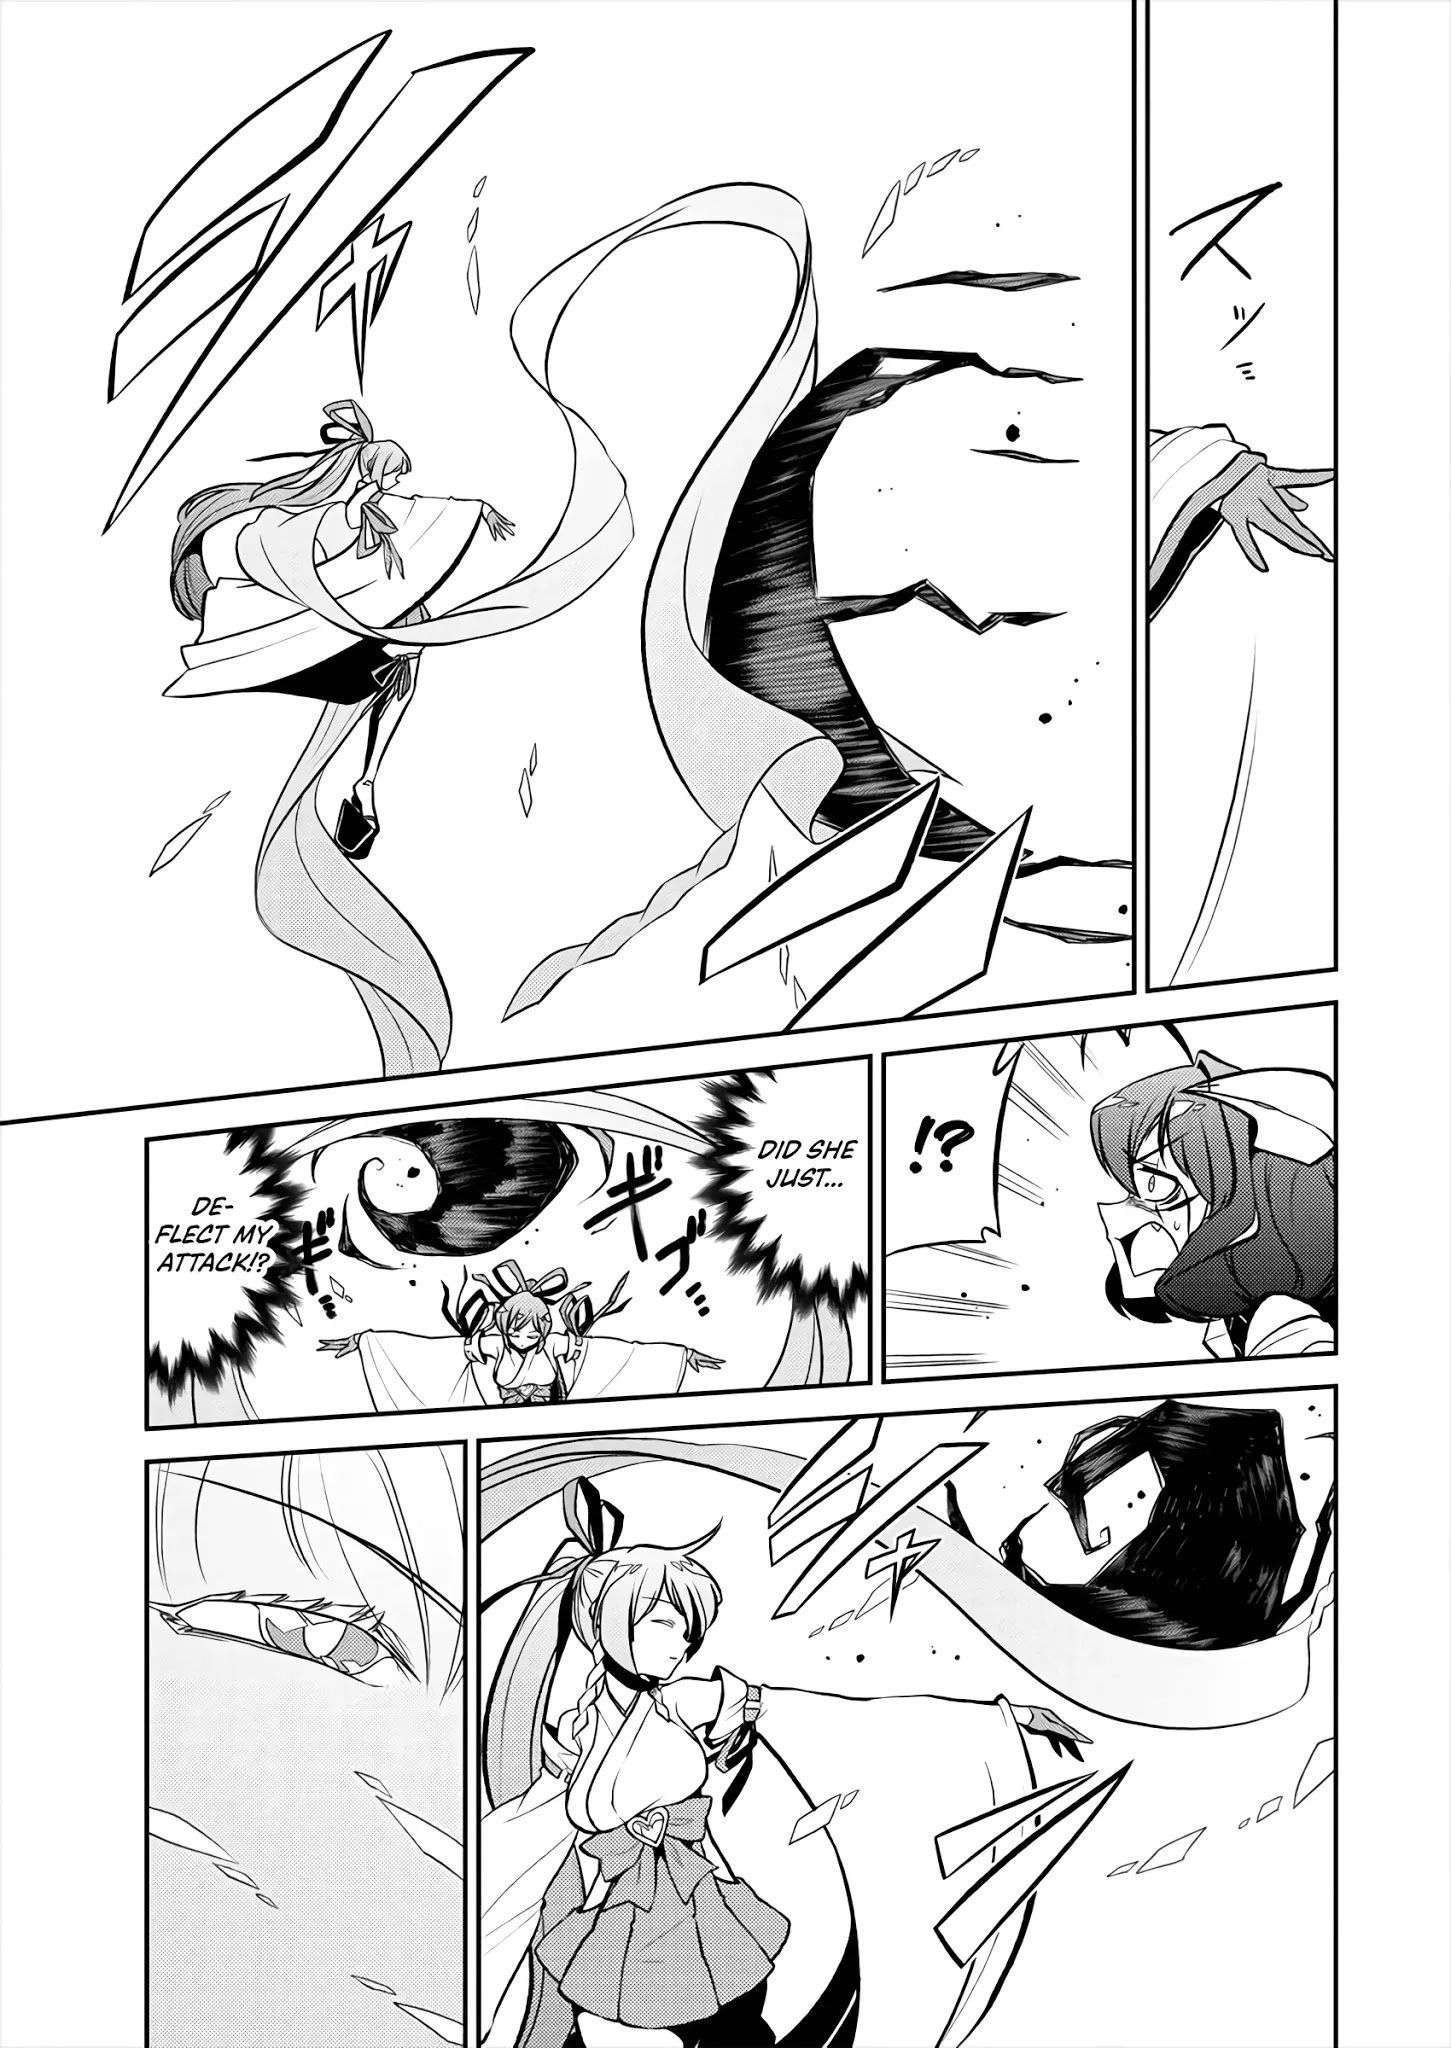 Gushing over Magical Girls - chapter 24 - #5